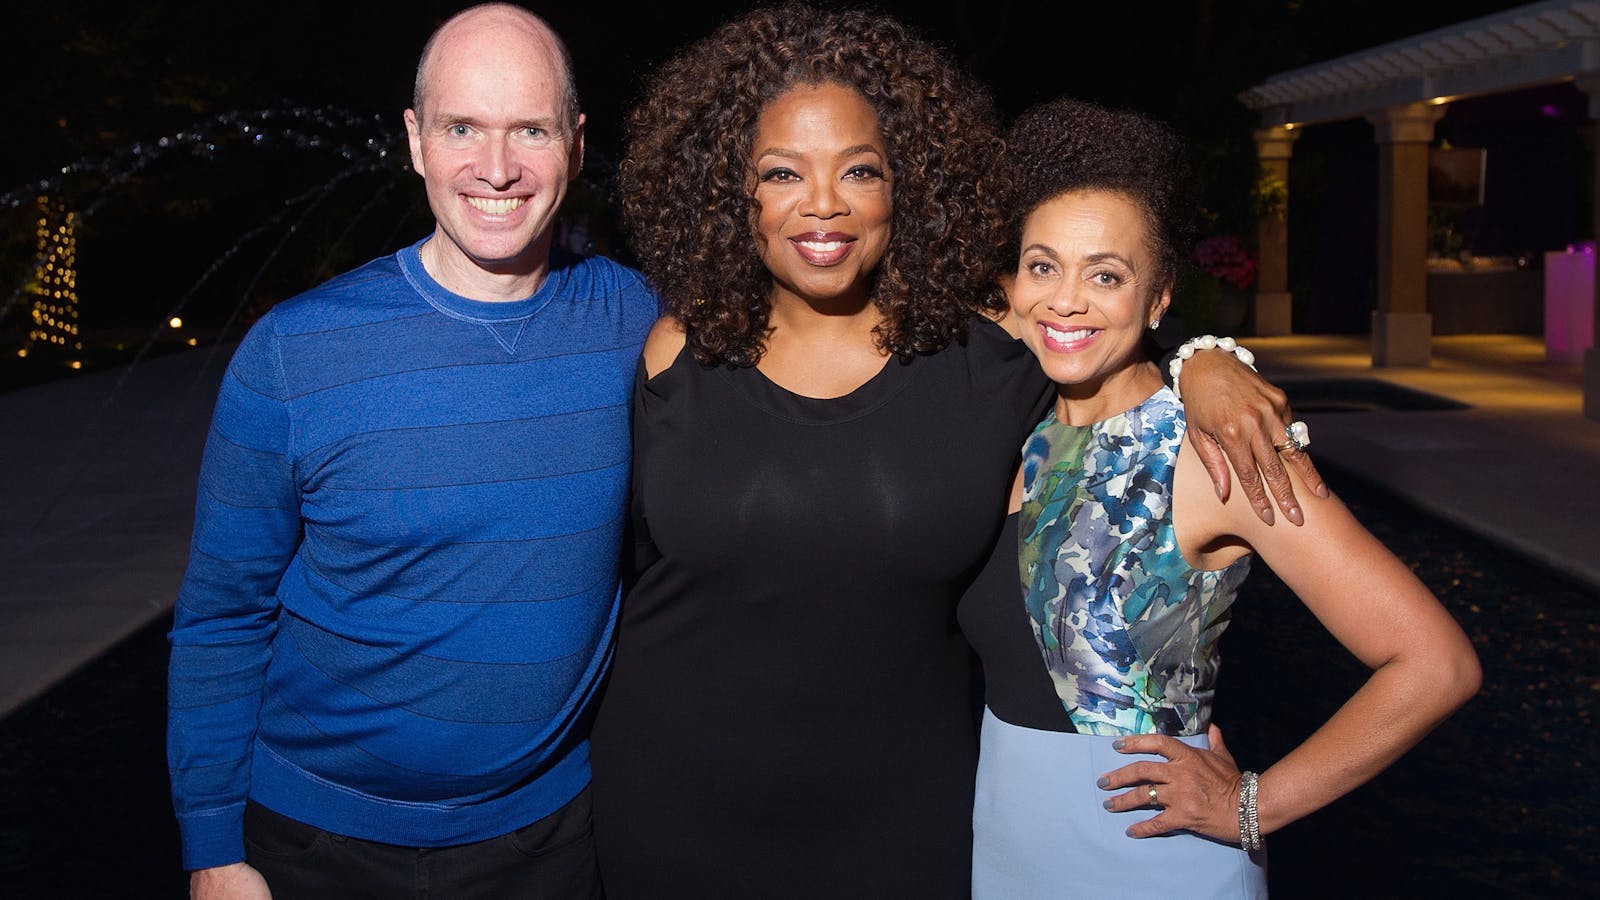 Ben Horowitz with his wife Felicia and Oprah Winfrey, center. Photo by AP.